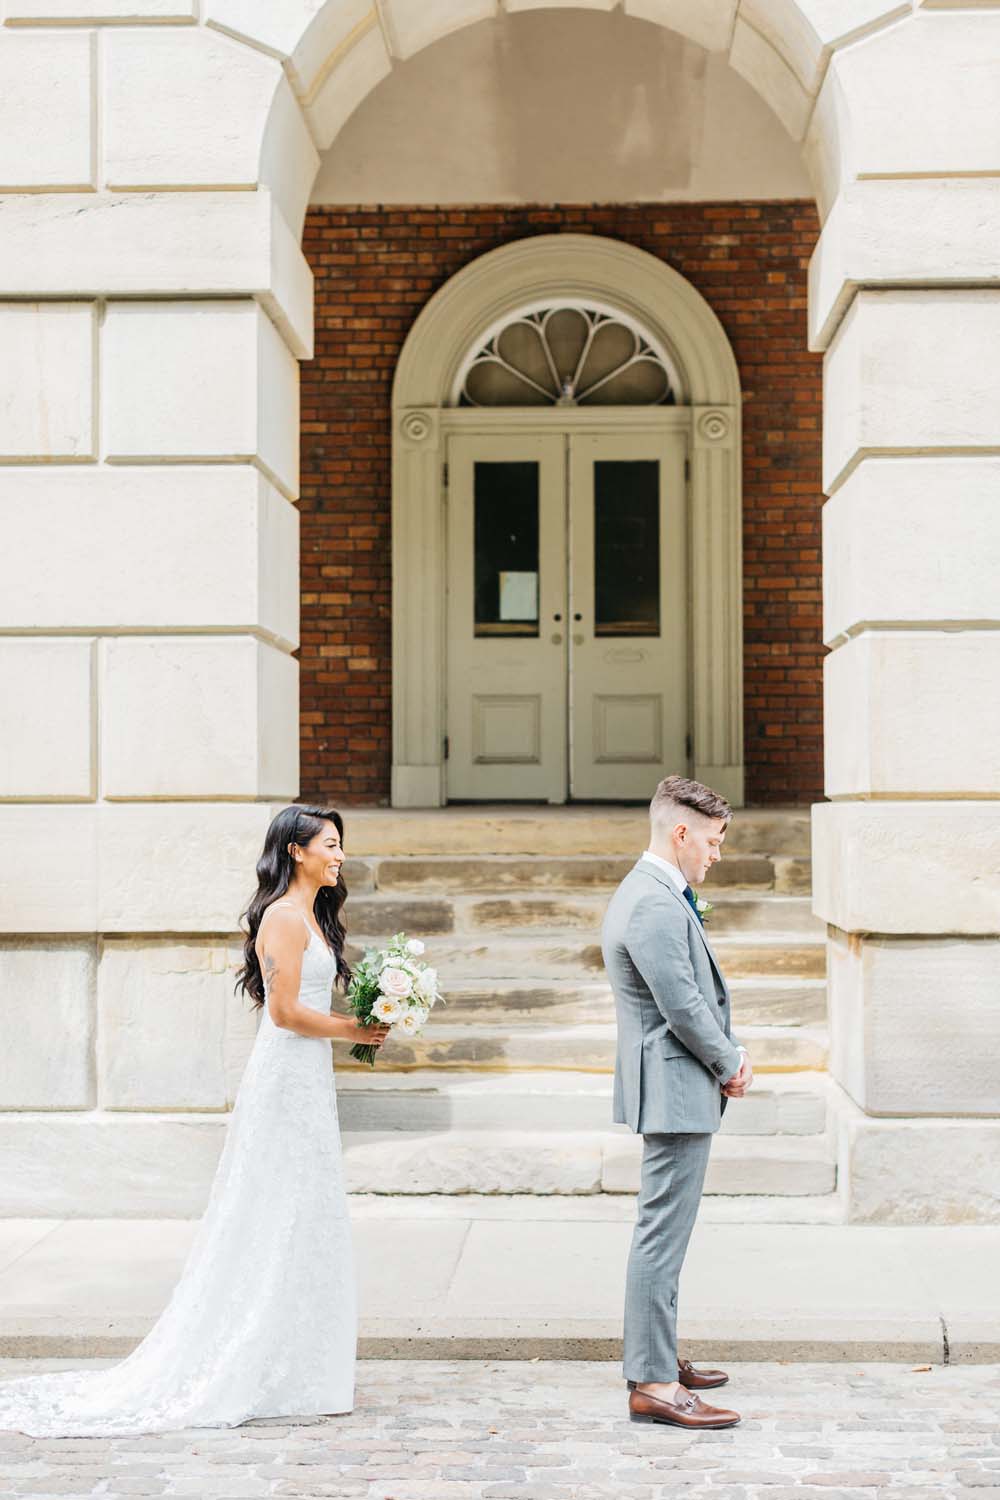 A Bright and Airy September Wedding in Toronto, Ontario - First Look